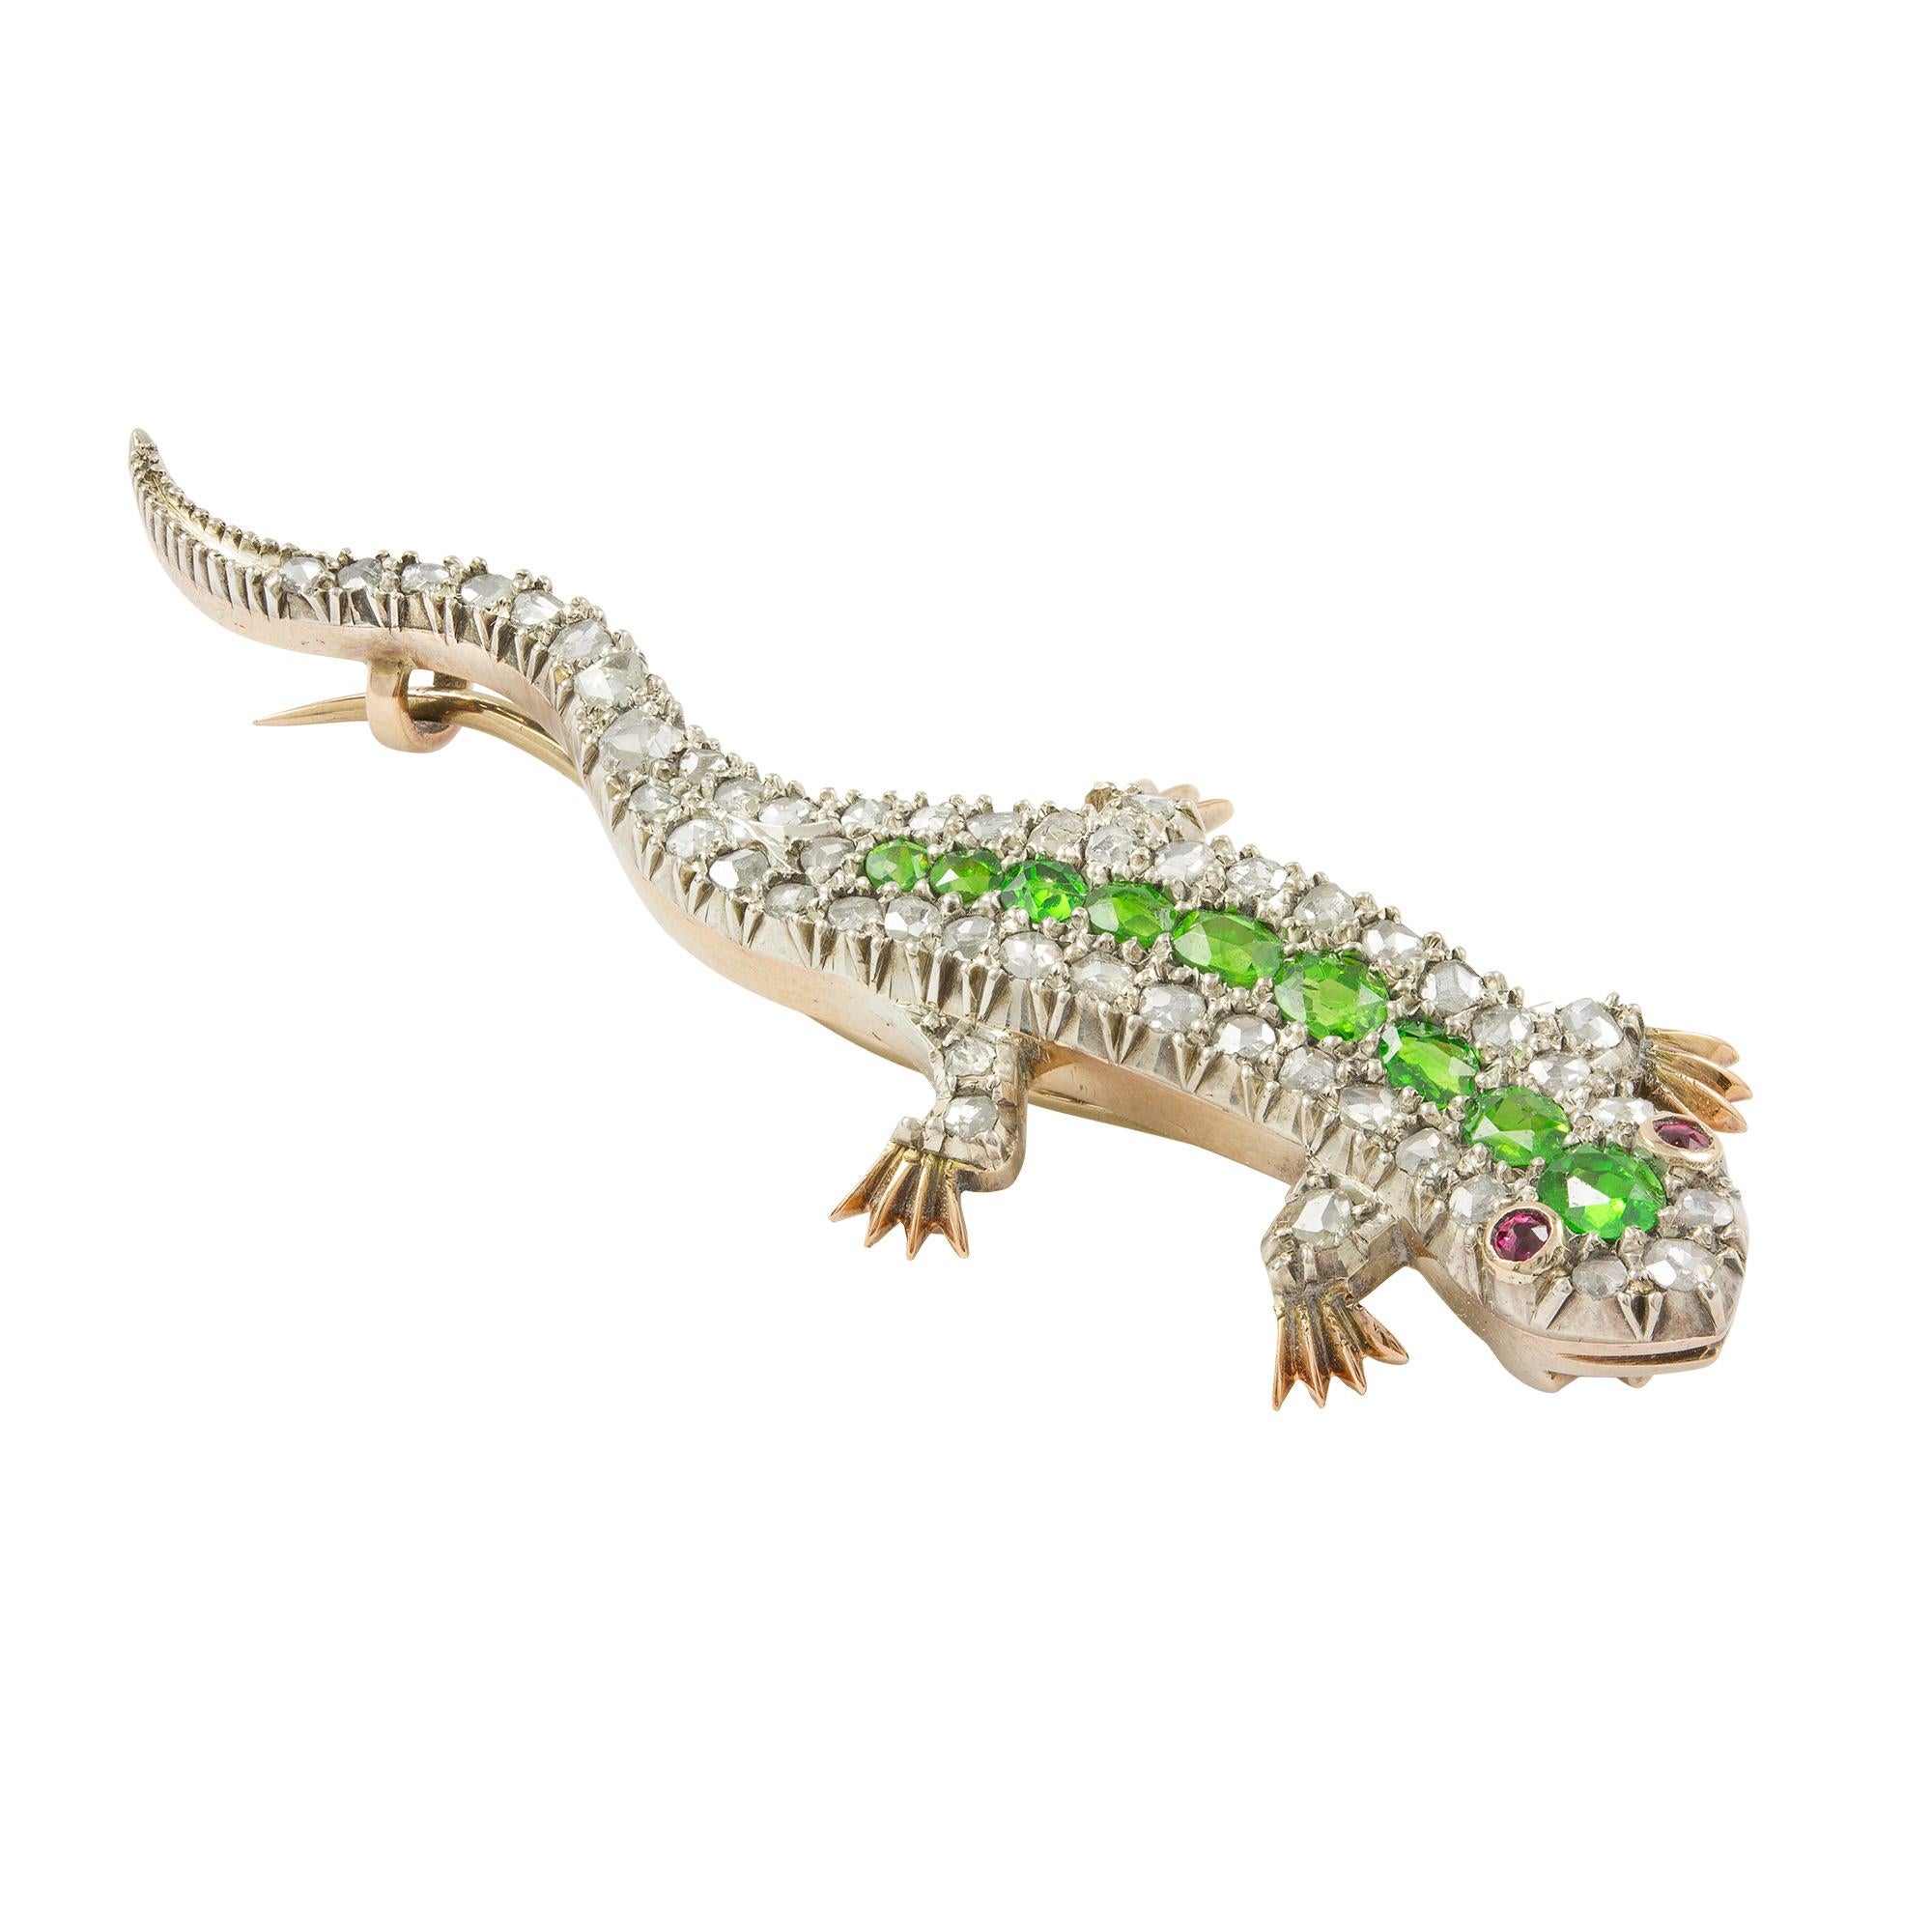 A late Victorian demantoid garnet and diamond brooch, the naturalistically modelled lizard encrusted with rose-cut diamonds and embellished to the spine with a row of nine graduated oval mixed-cut demantoid garnets, all silver set to a yellow gold